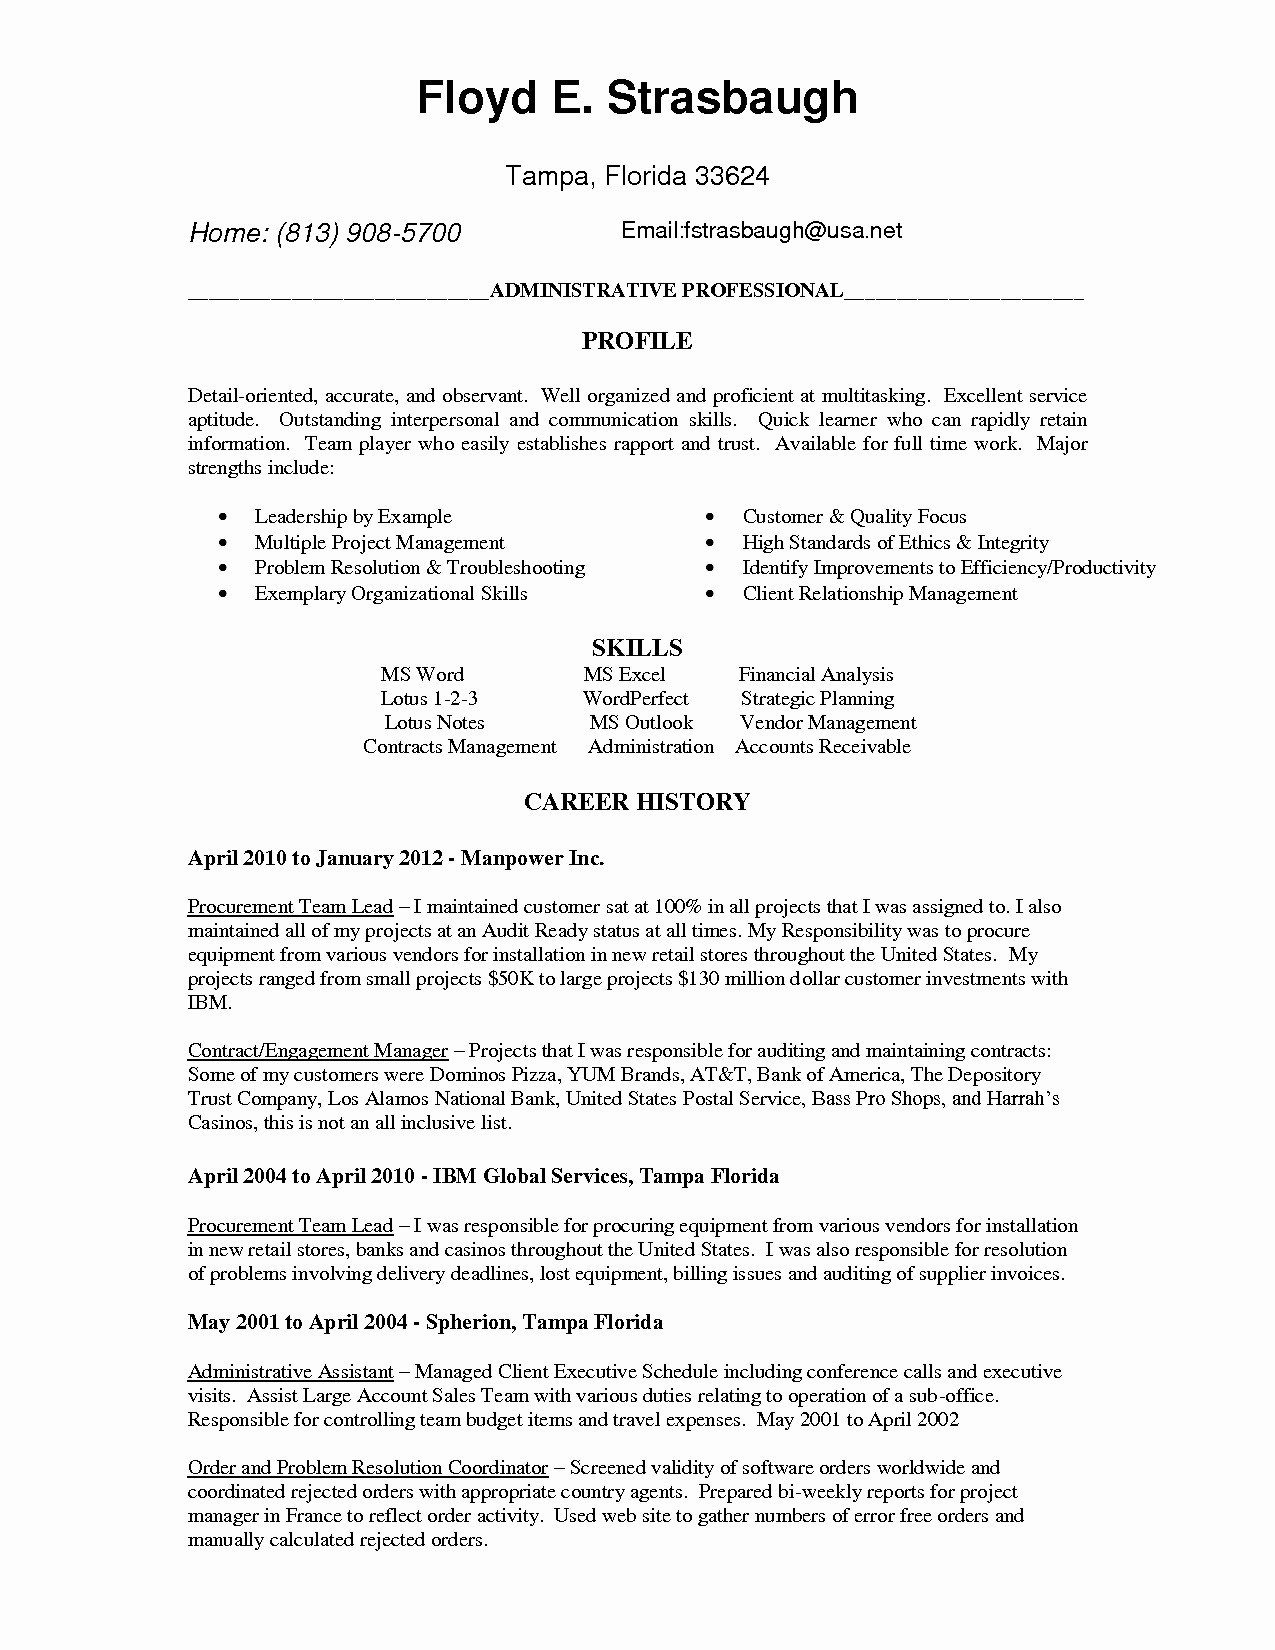 business cover letter template word Collection-Free Microsoft Word Resume Templates Awesome Professional Job Resume Template Od Specialist Cover Letter Lead Staggering Business Ppt Templates Free 5-l